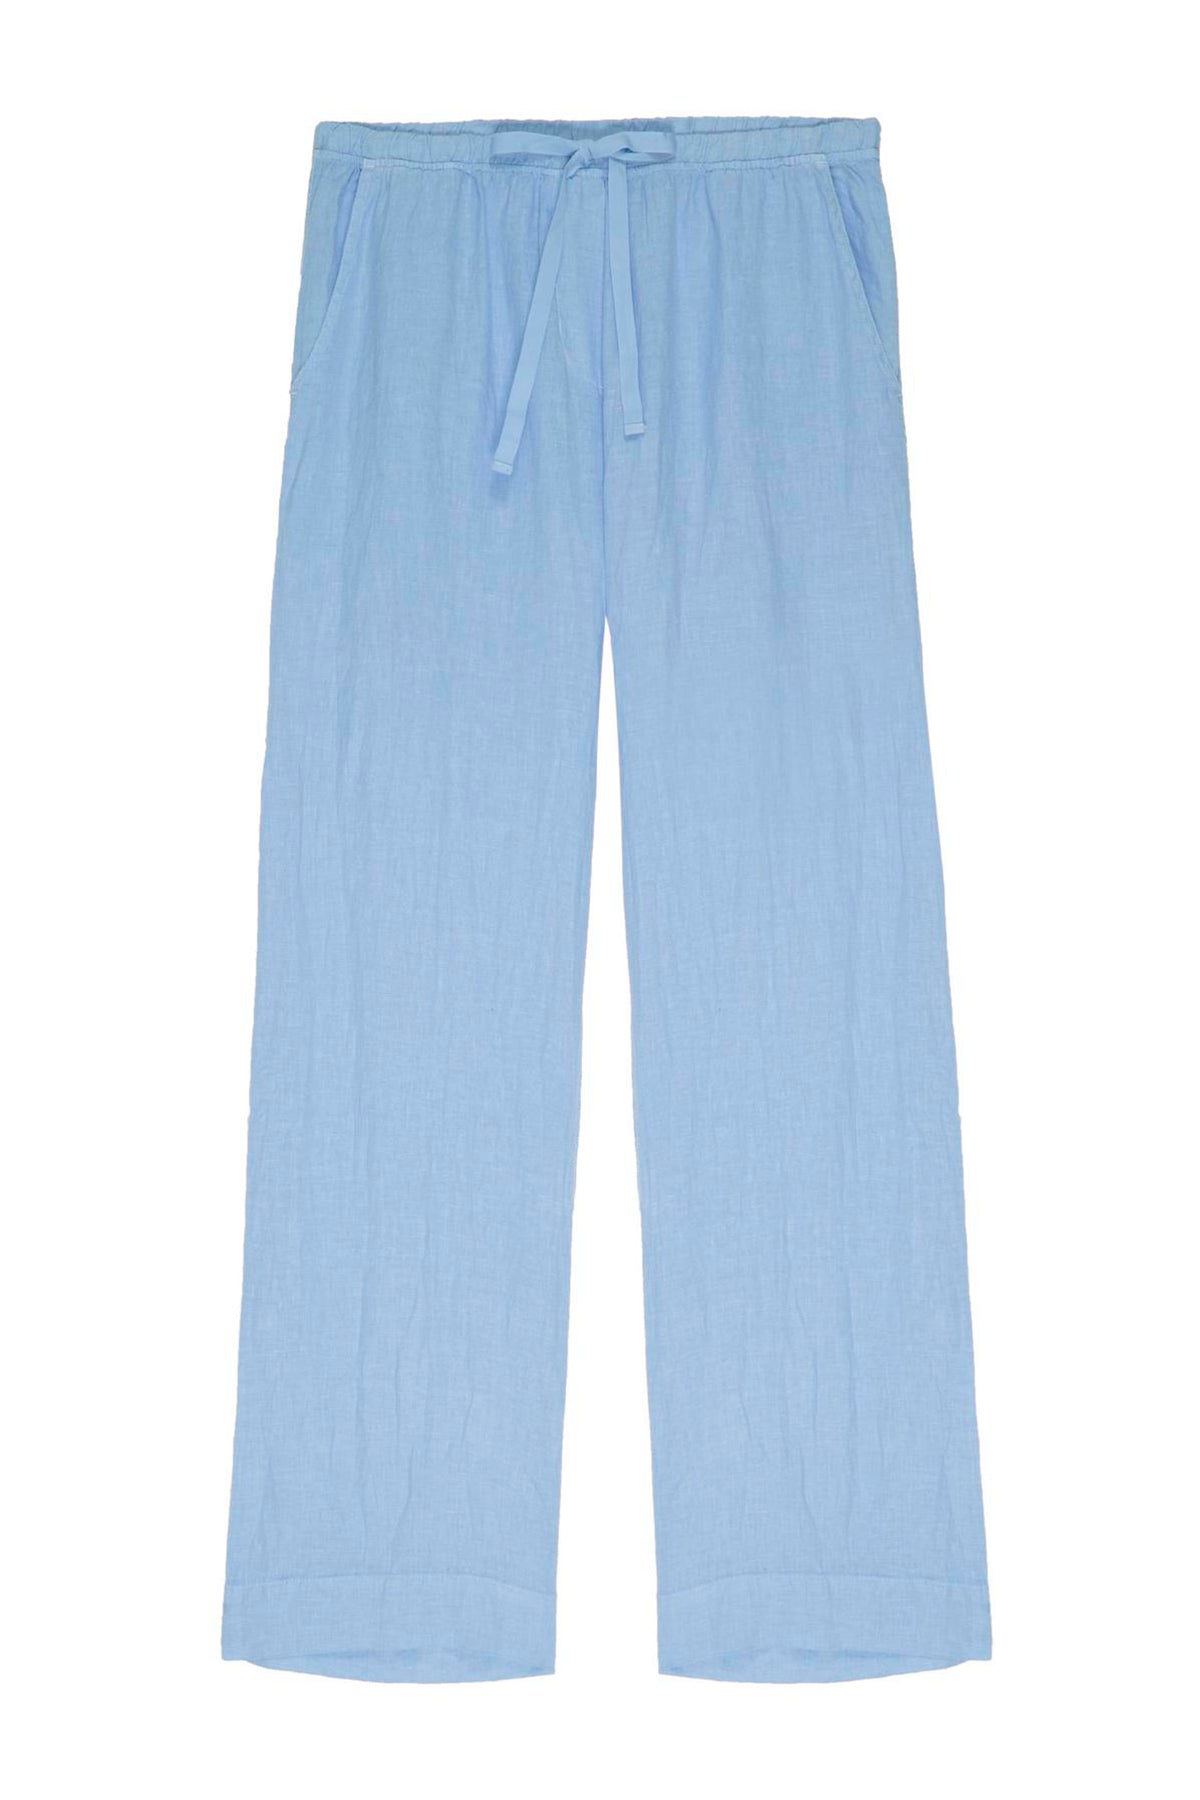   Light blue relaxed fit PICO LINEN PANTS with a drawstring waist, displayed against a white background by Velvet by Jenny Graham. 